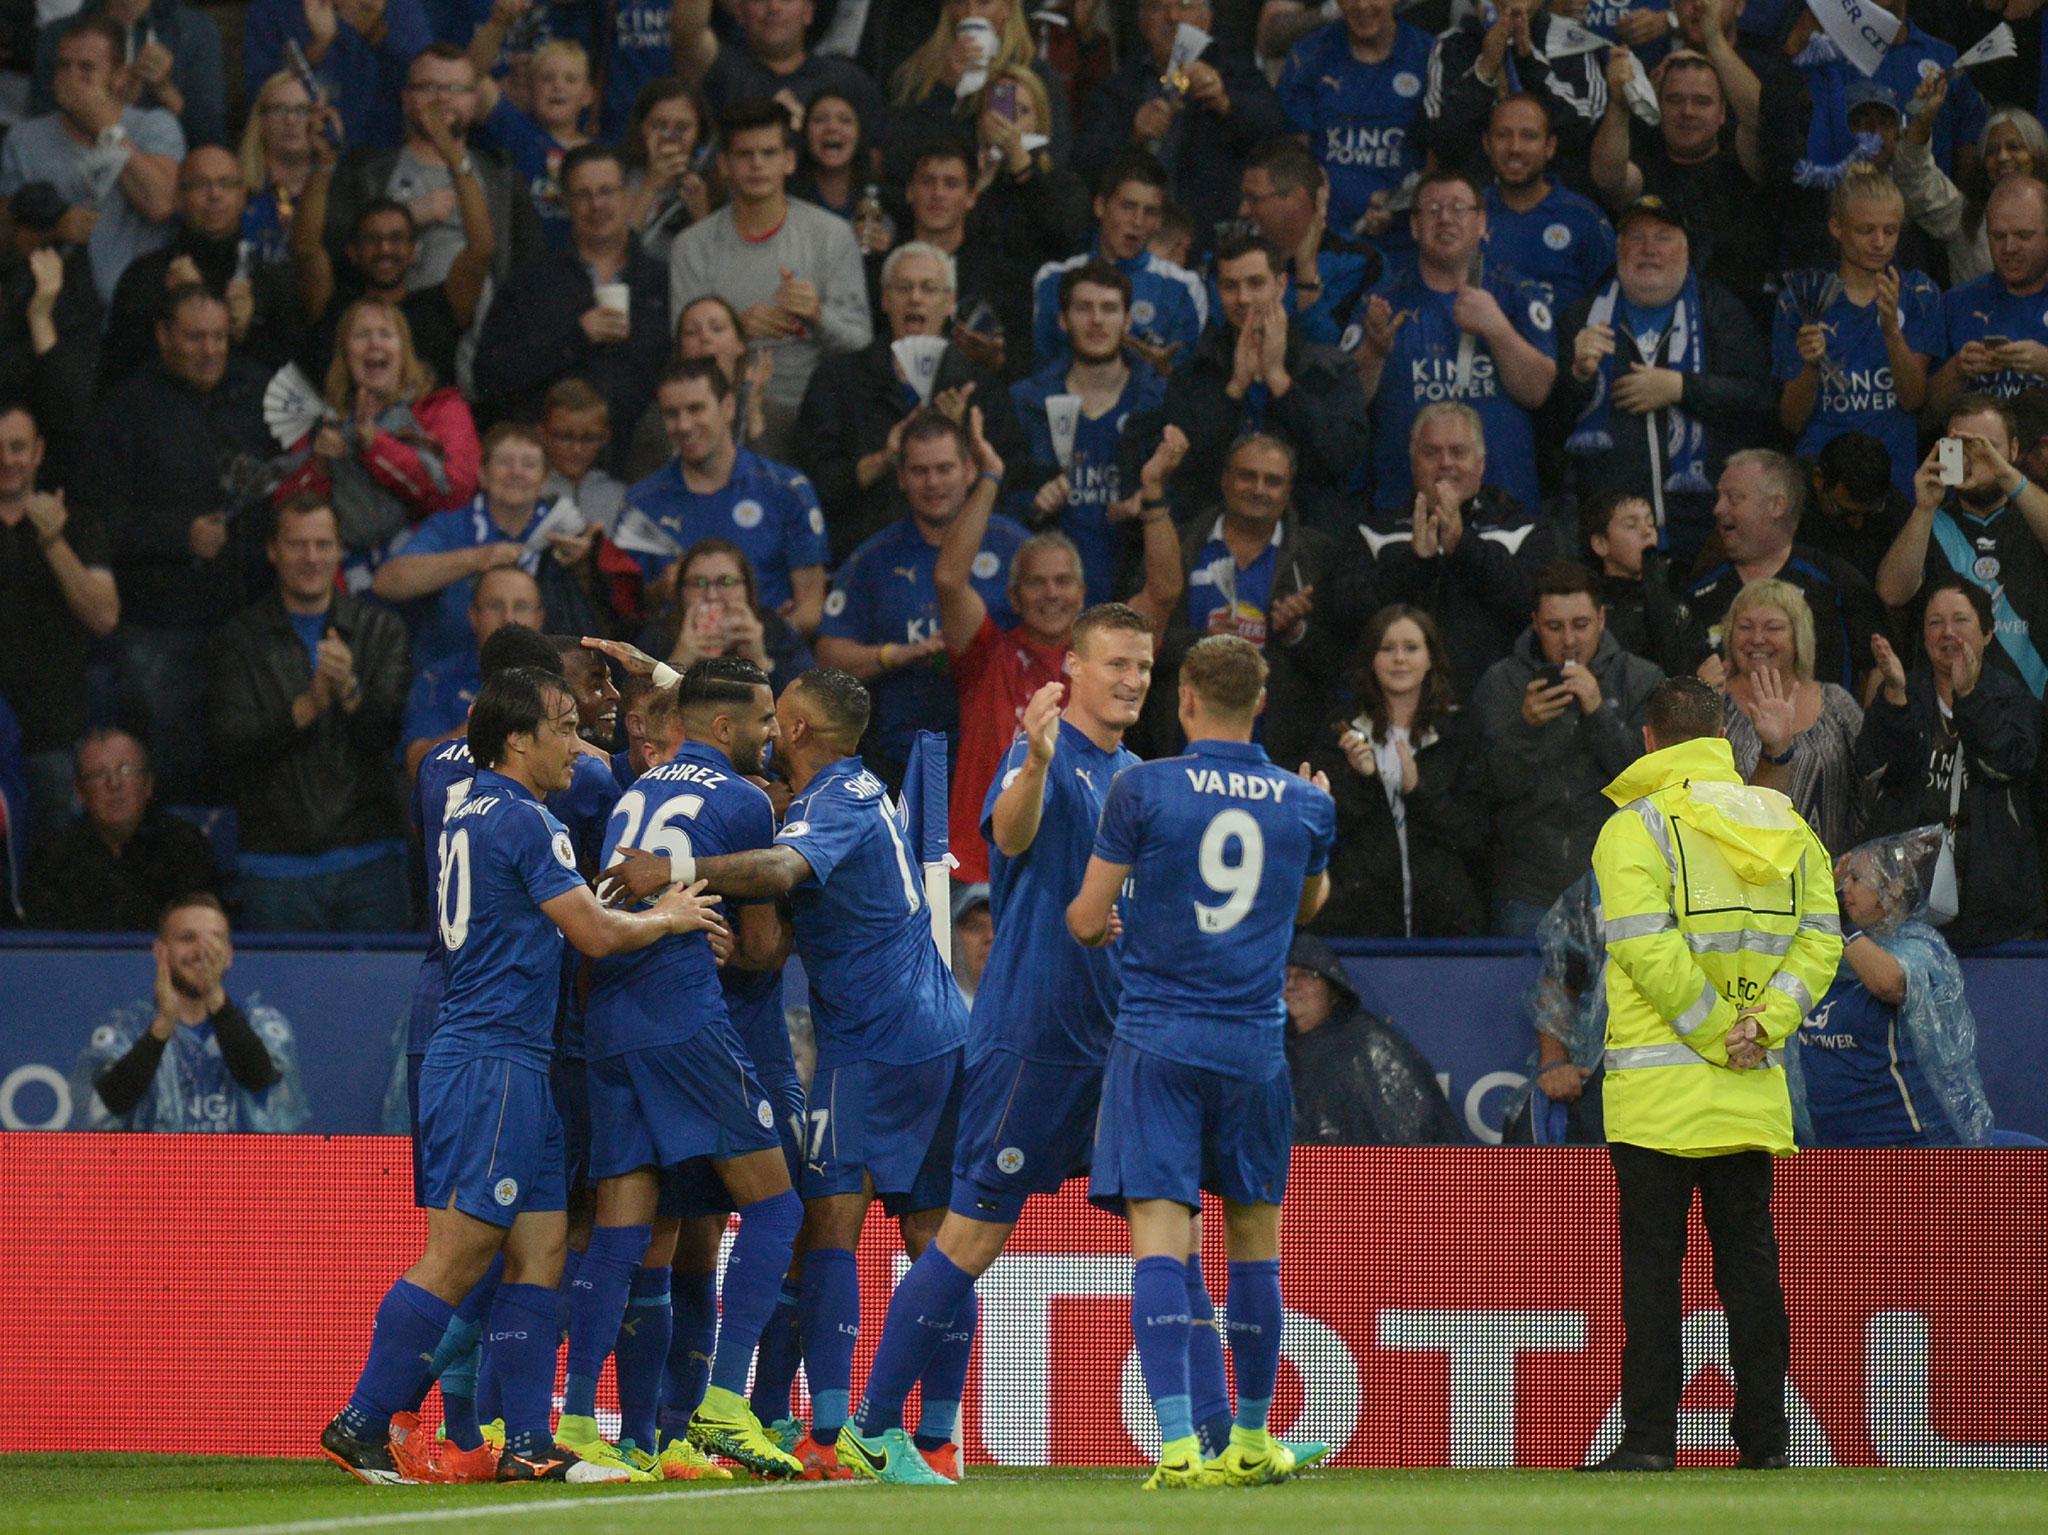 Leicester could be the first team since Malaga to win the group during their first Champions League season